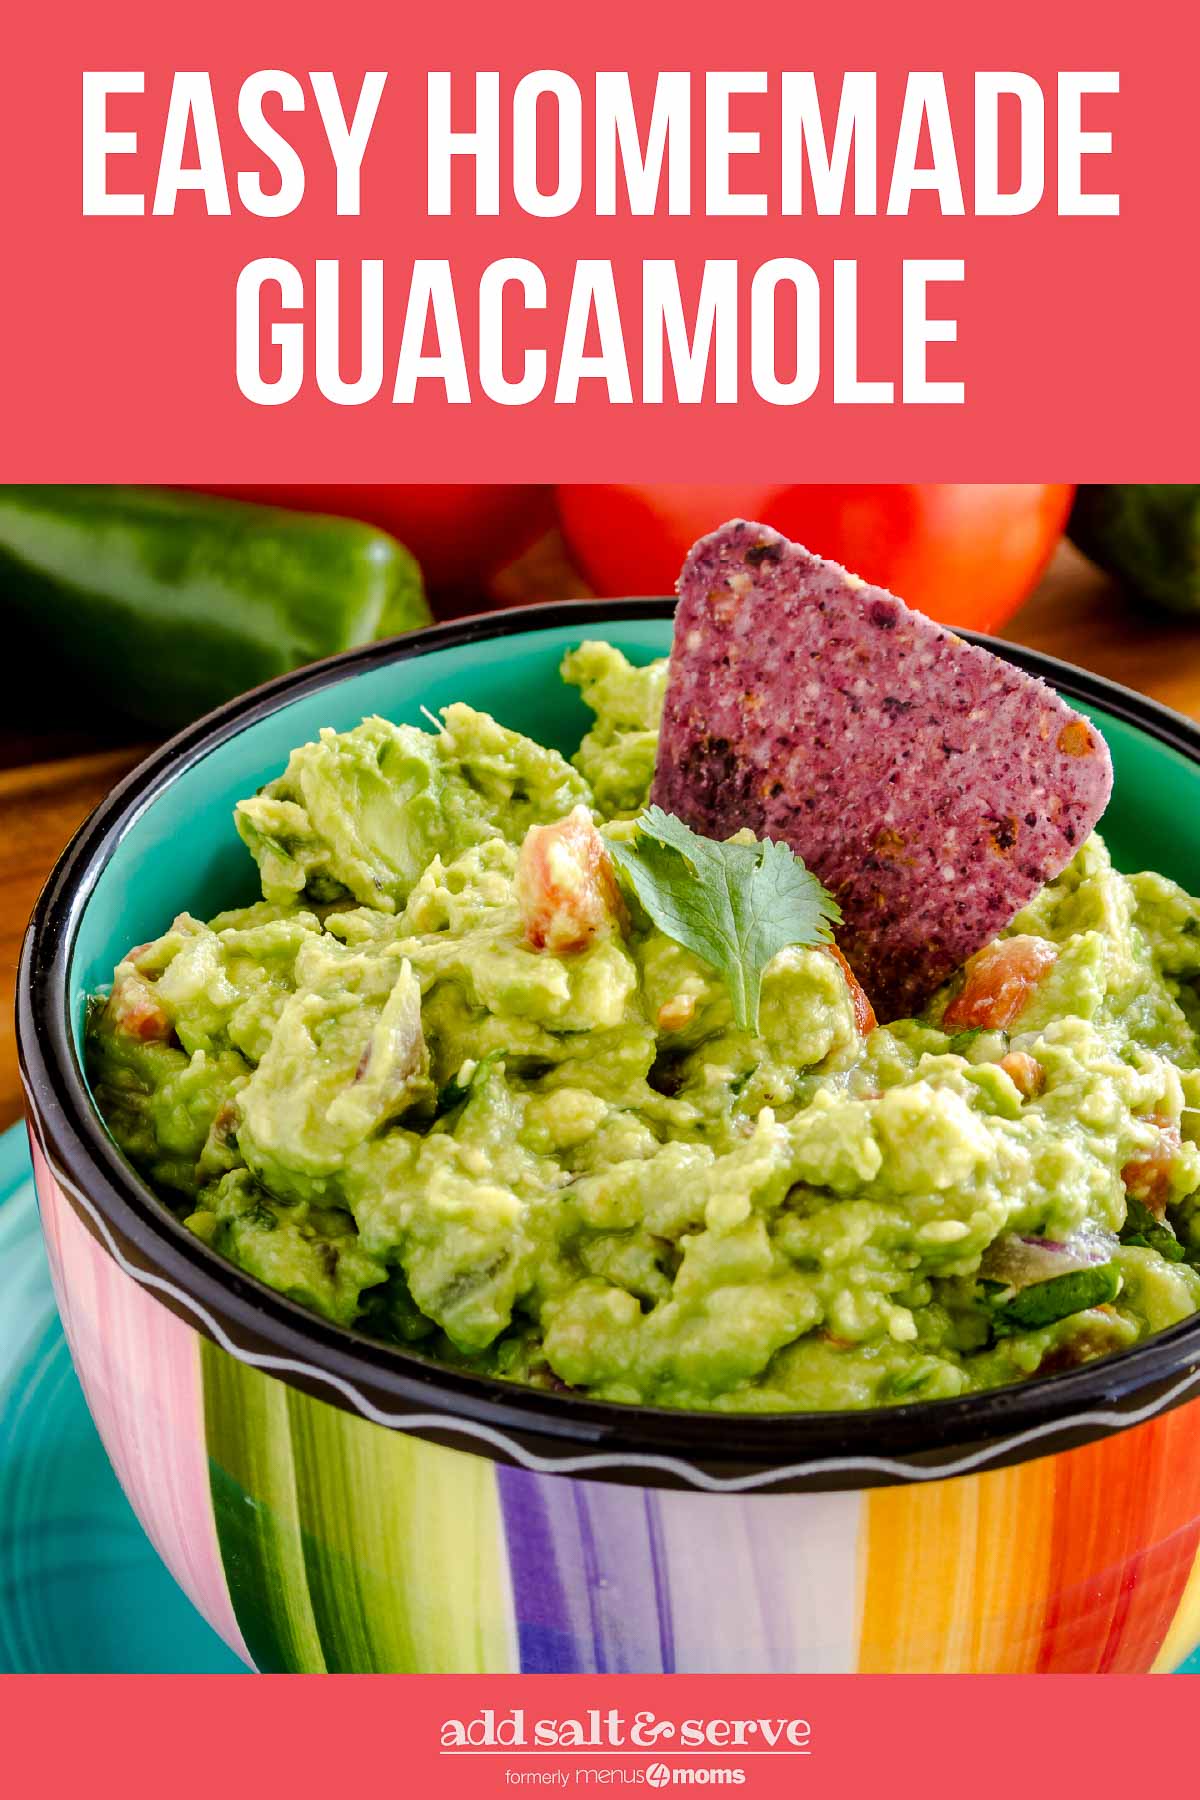 Homemade guacamole in a rainbow-striped bowl, with half an avocado in the background.